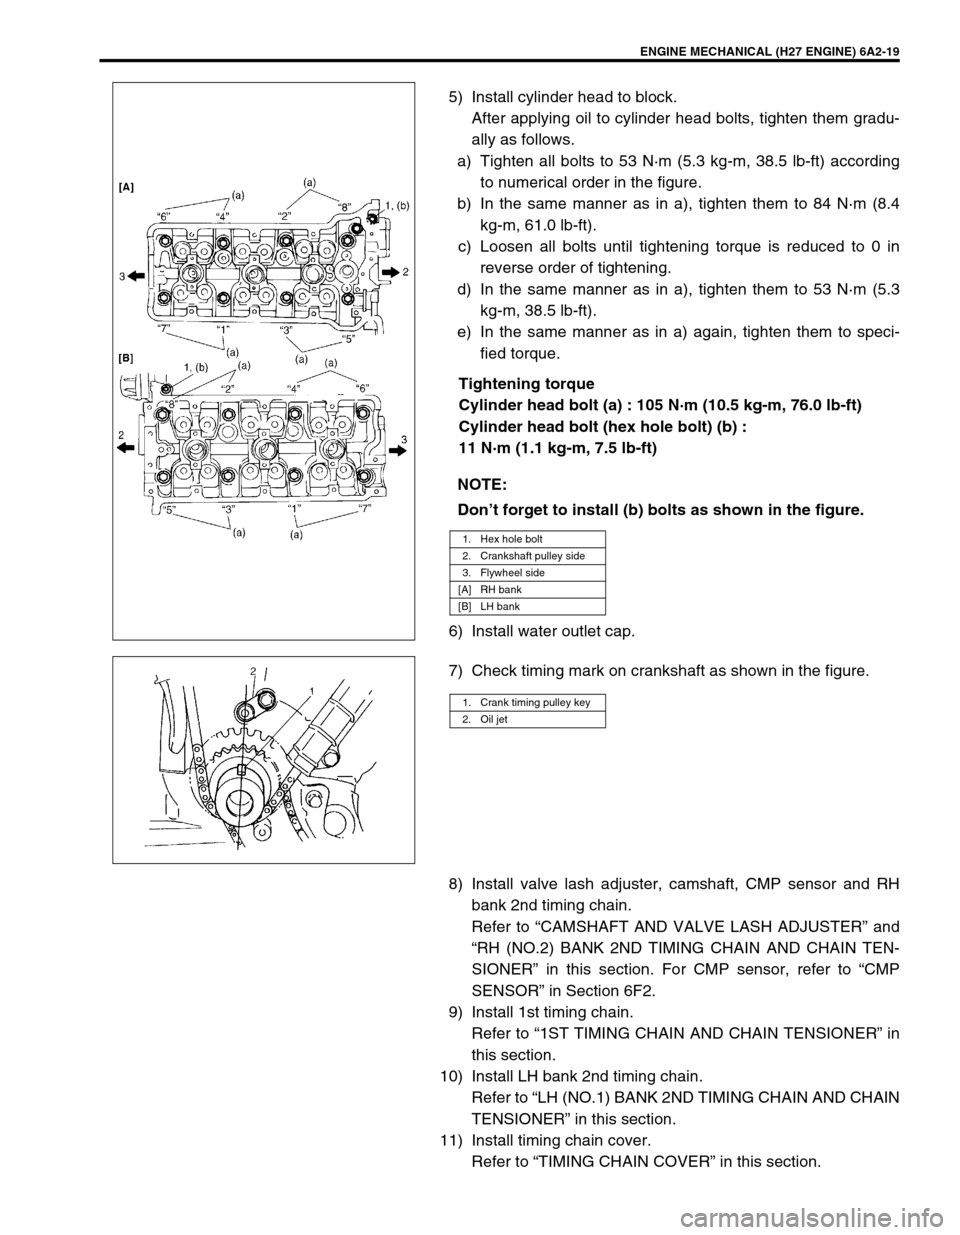 SUZUKI GRAND VITARA 1999 2.G Owners Guide ENGINE MECHANICAL (H27 ENGINE) 6A2-19
5) Install cylinder head to block.
After applying oil to cylinder head bolts, tighten them gradu-
ally as follows.
a) Tighten all bolts to 53 N·m (5.3 kg-m, 38.5